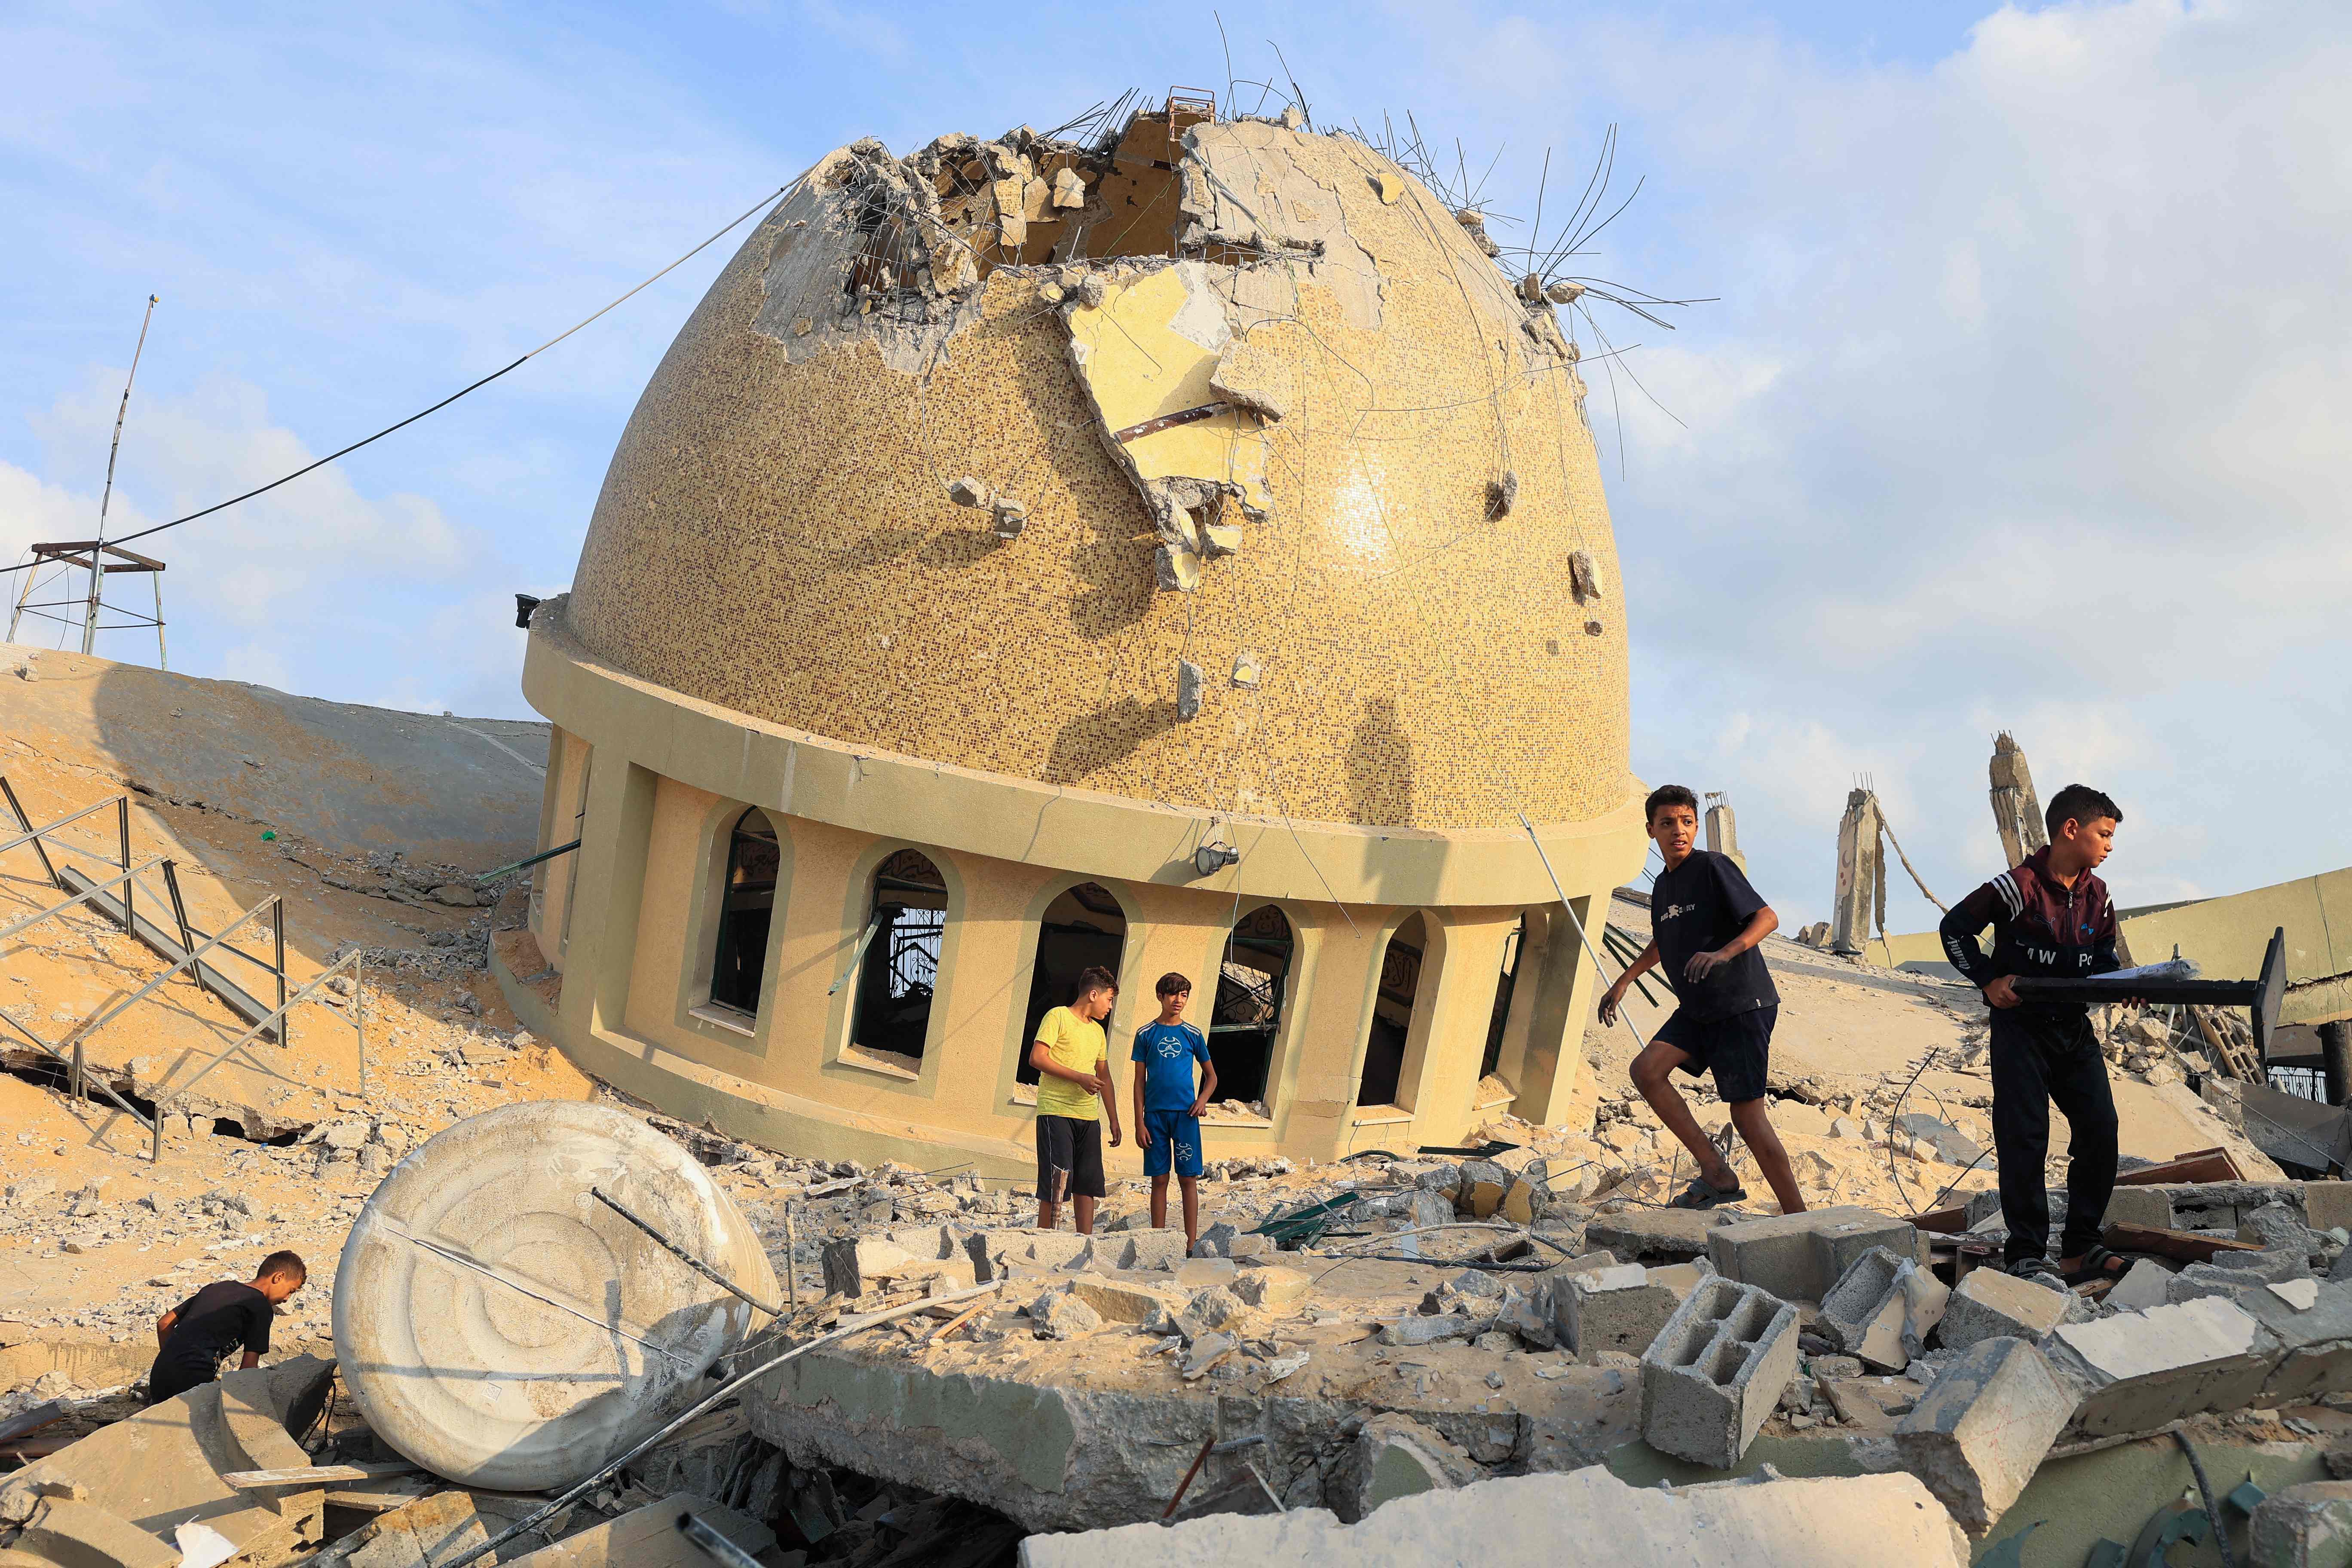 Children are seen walking through the ruins of a bombed-out mosque in the south of the Gaza Strip